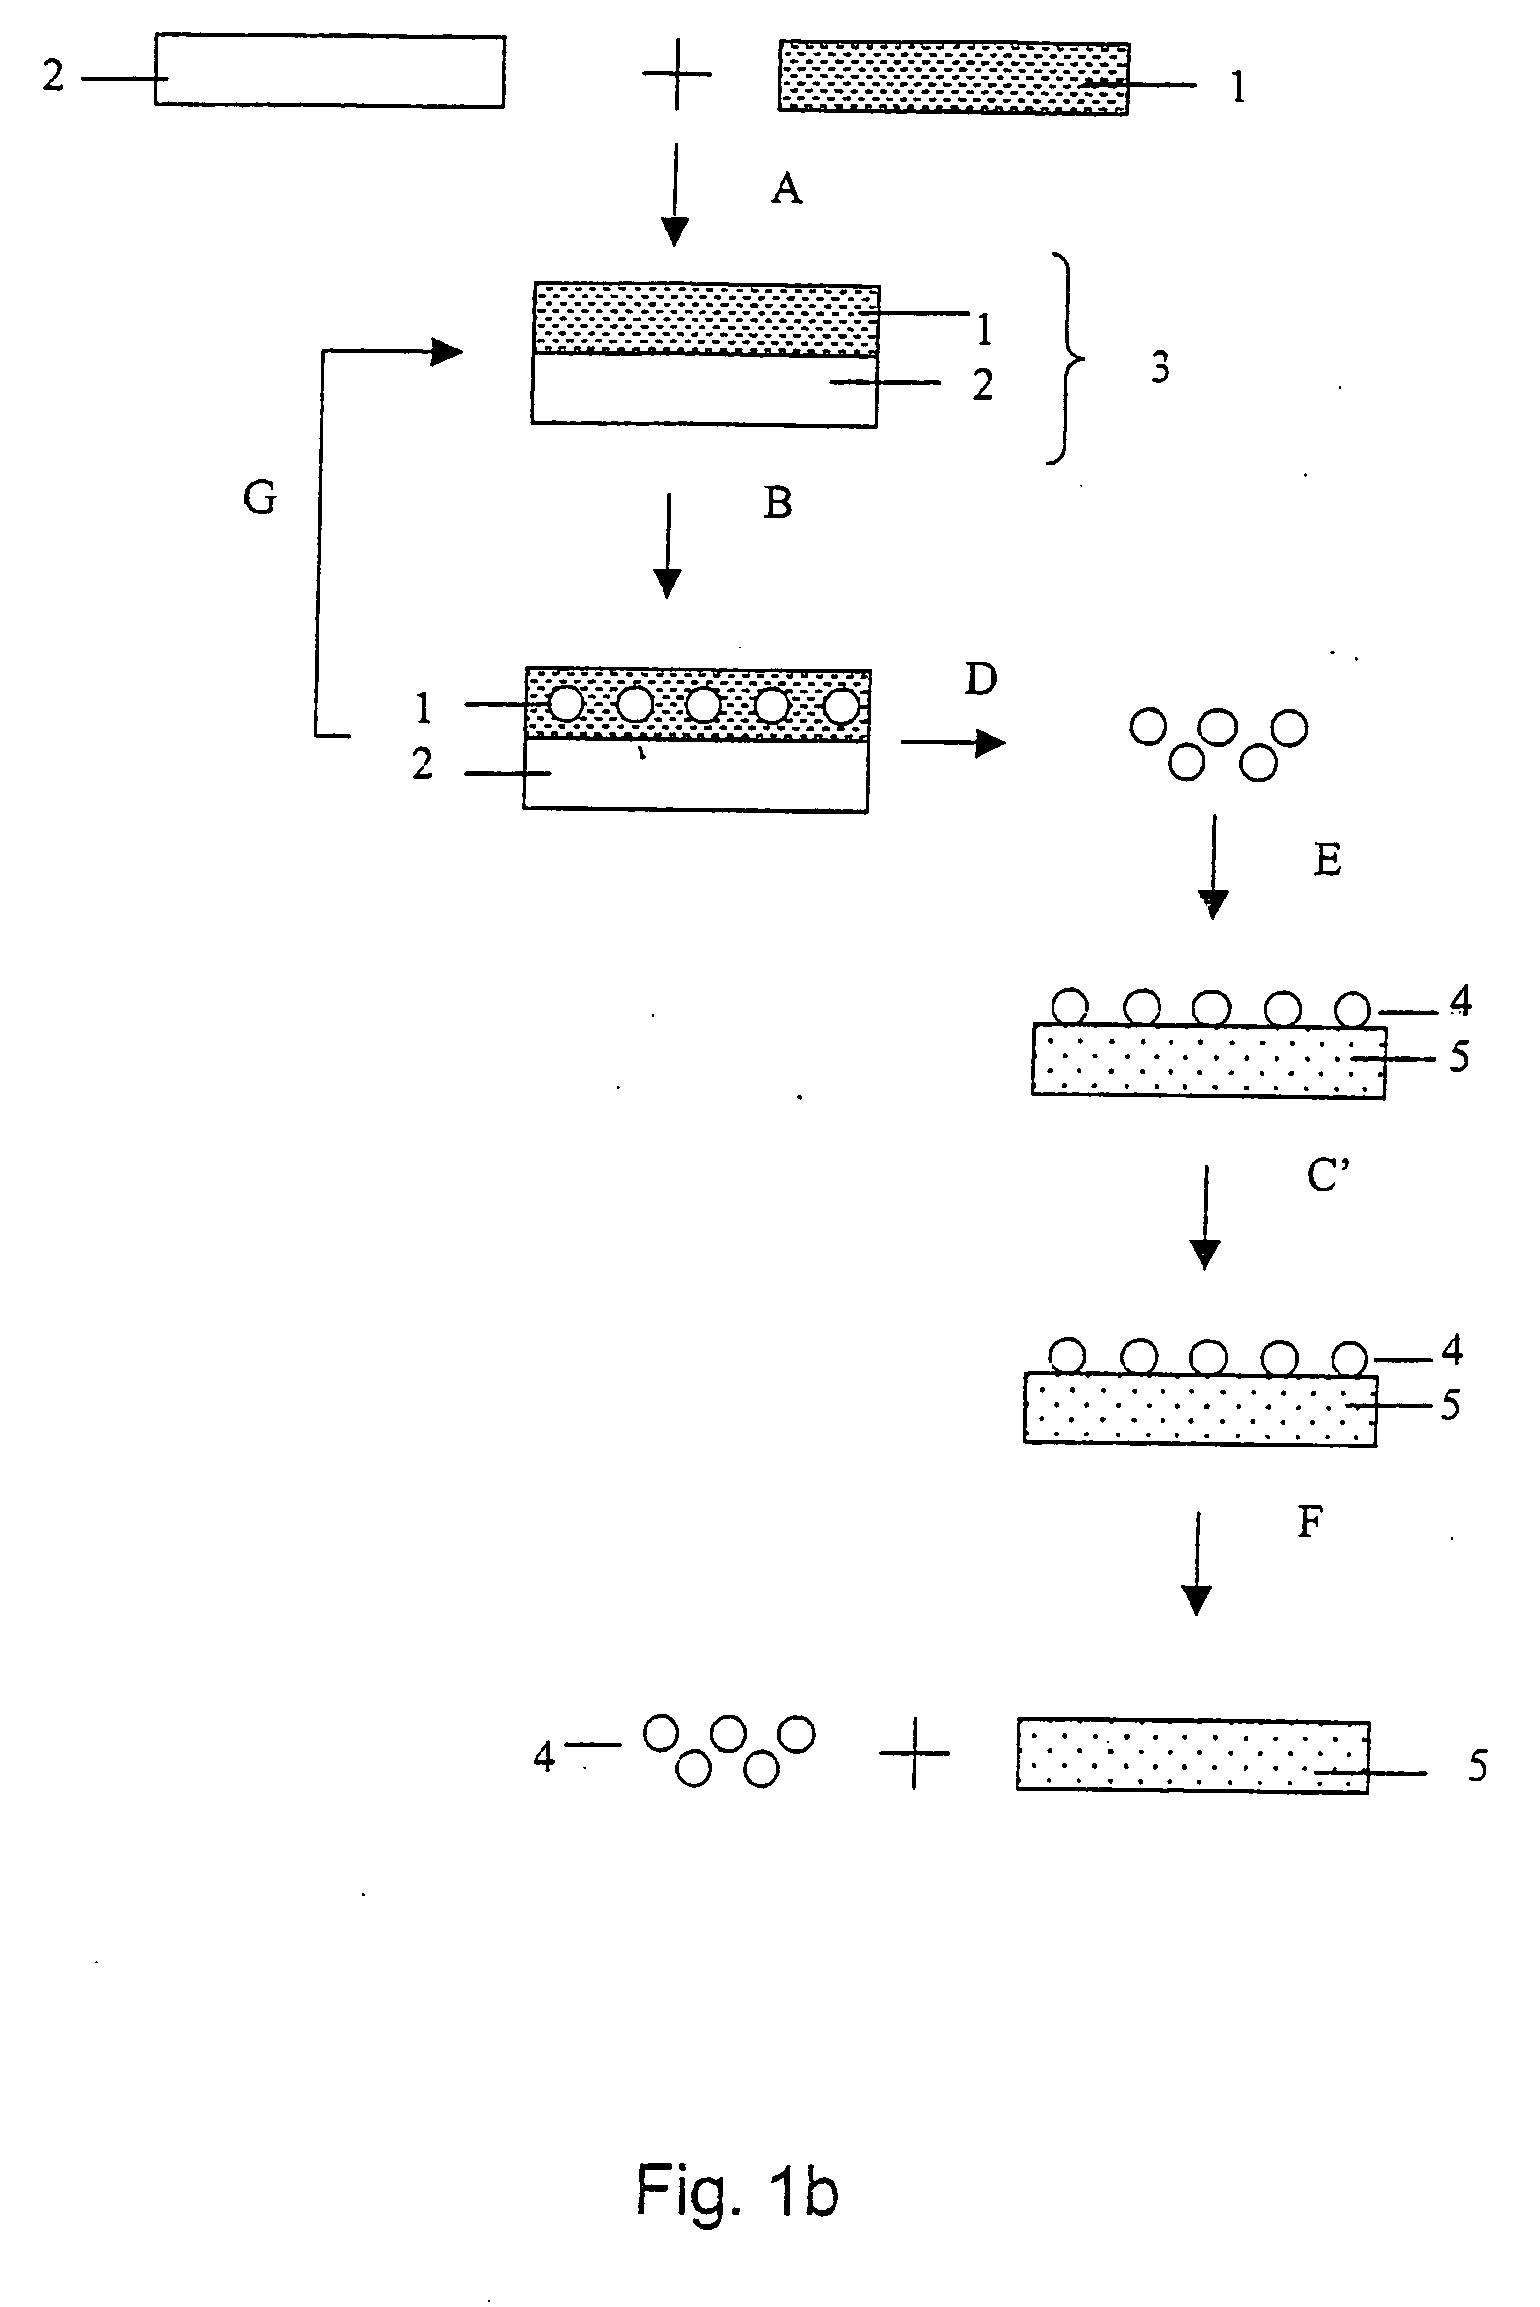 Method and device for production of radio-isotopes from a target